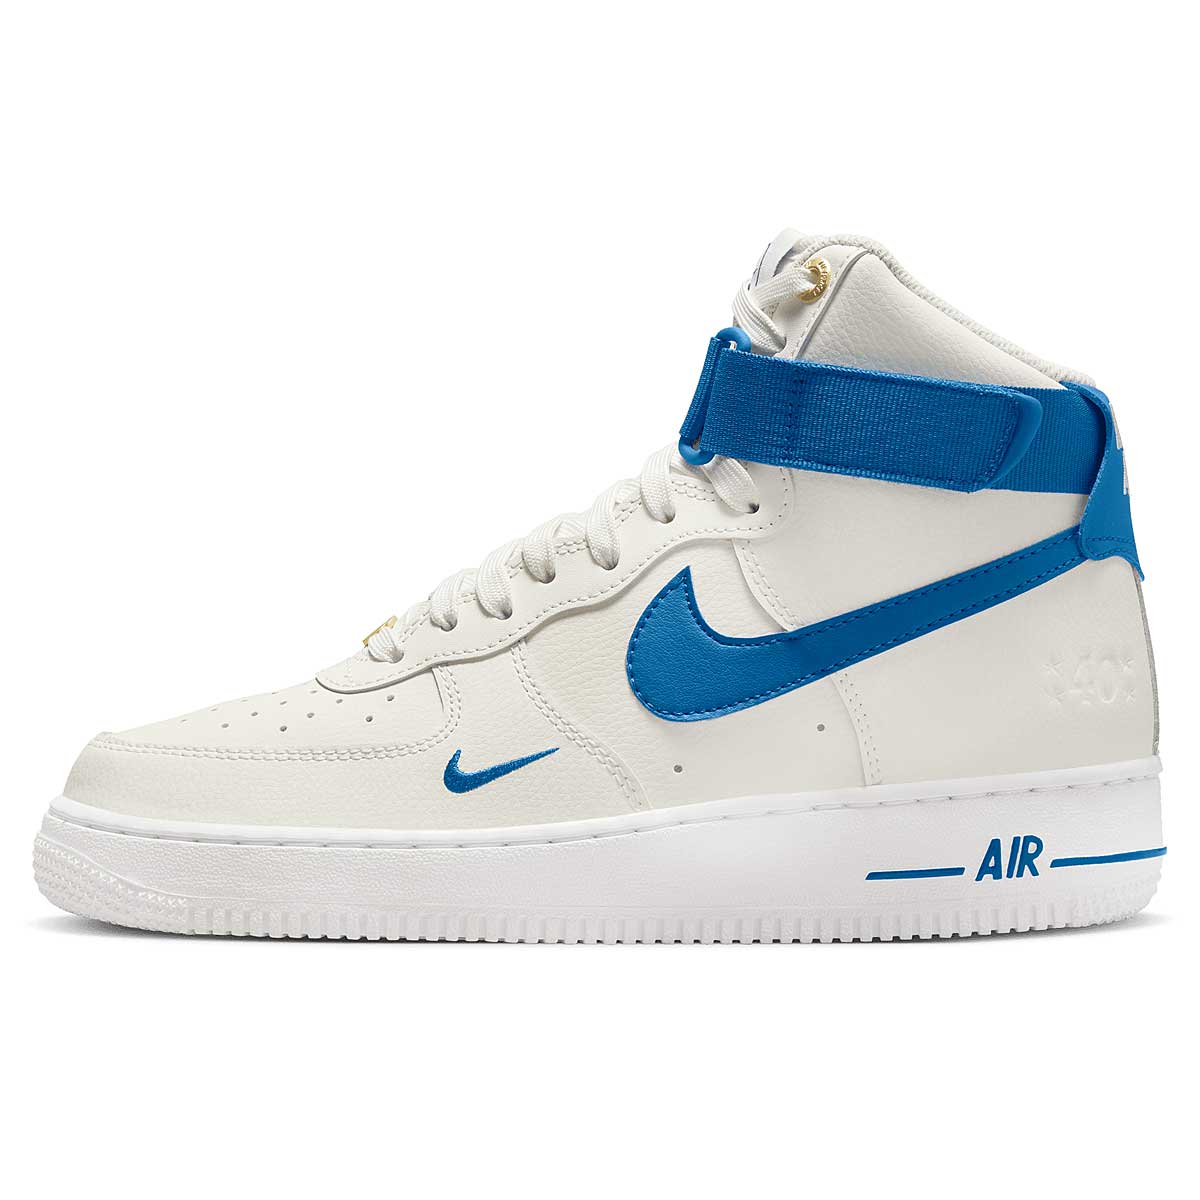 Buy Air Force 1 High SE for N/A 0.0 on KICKZ.com!